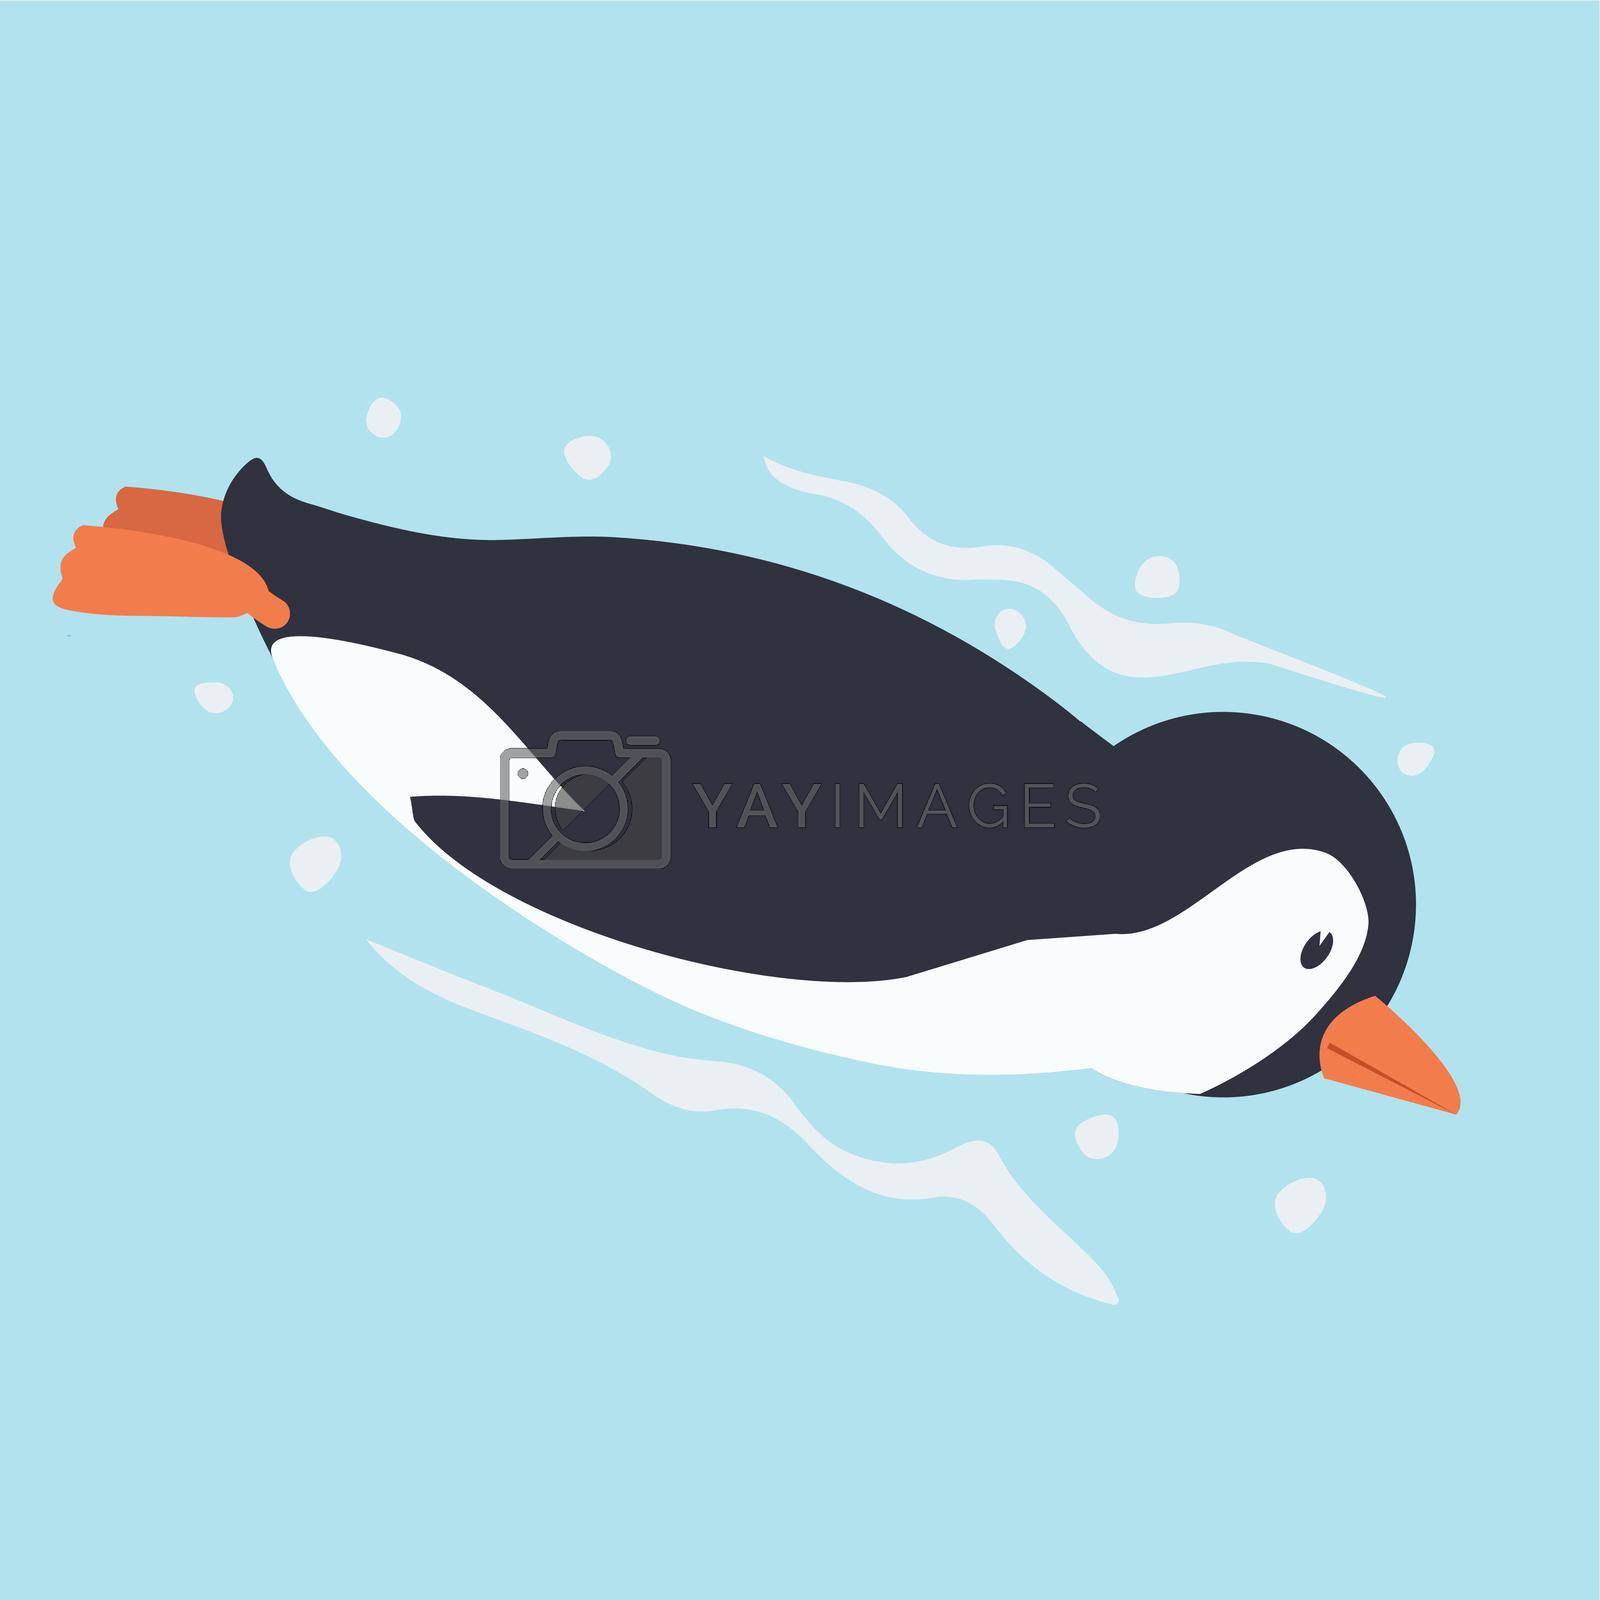 Royalty free image of Cute penguin swimming cartoon vector by focus_bell